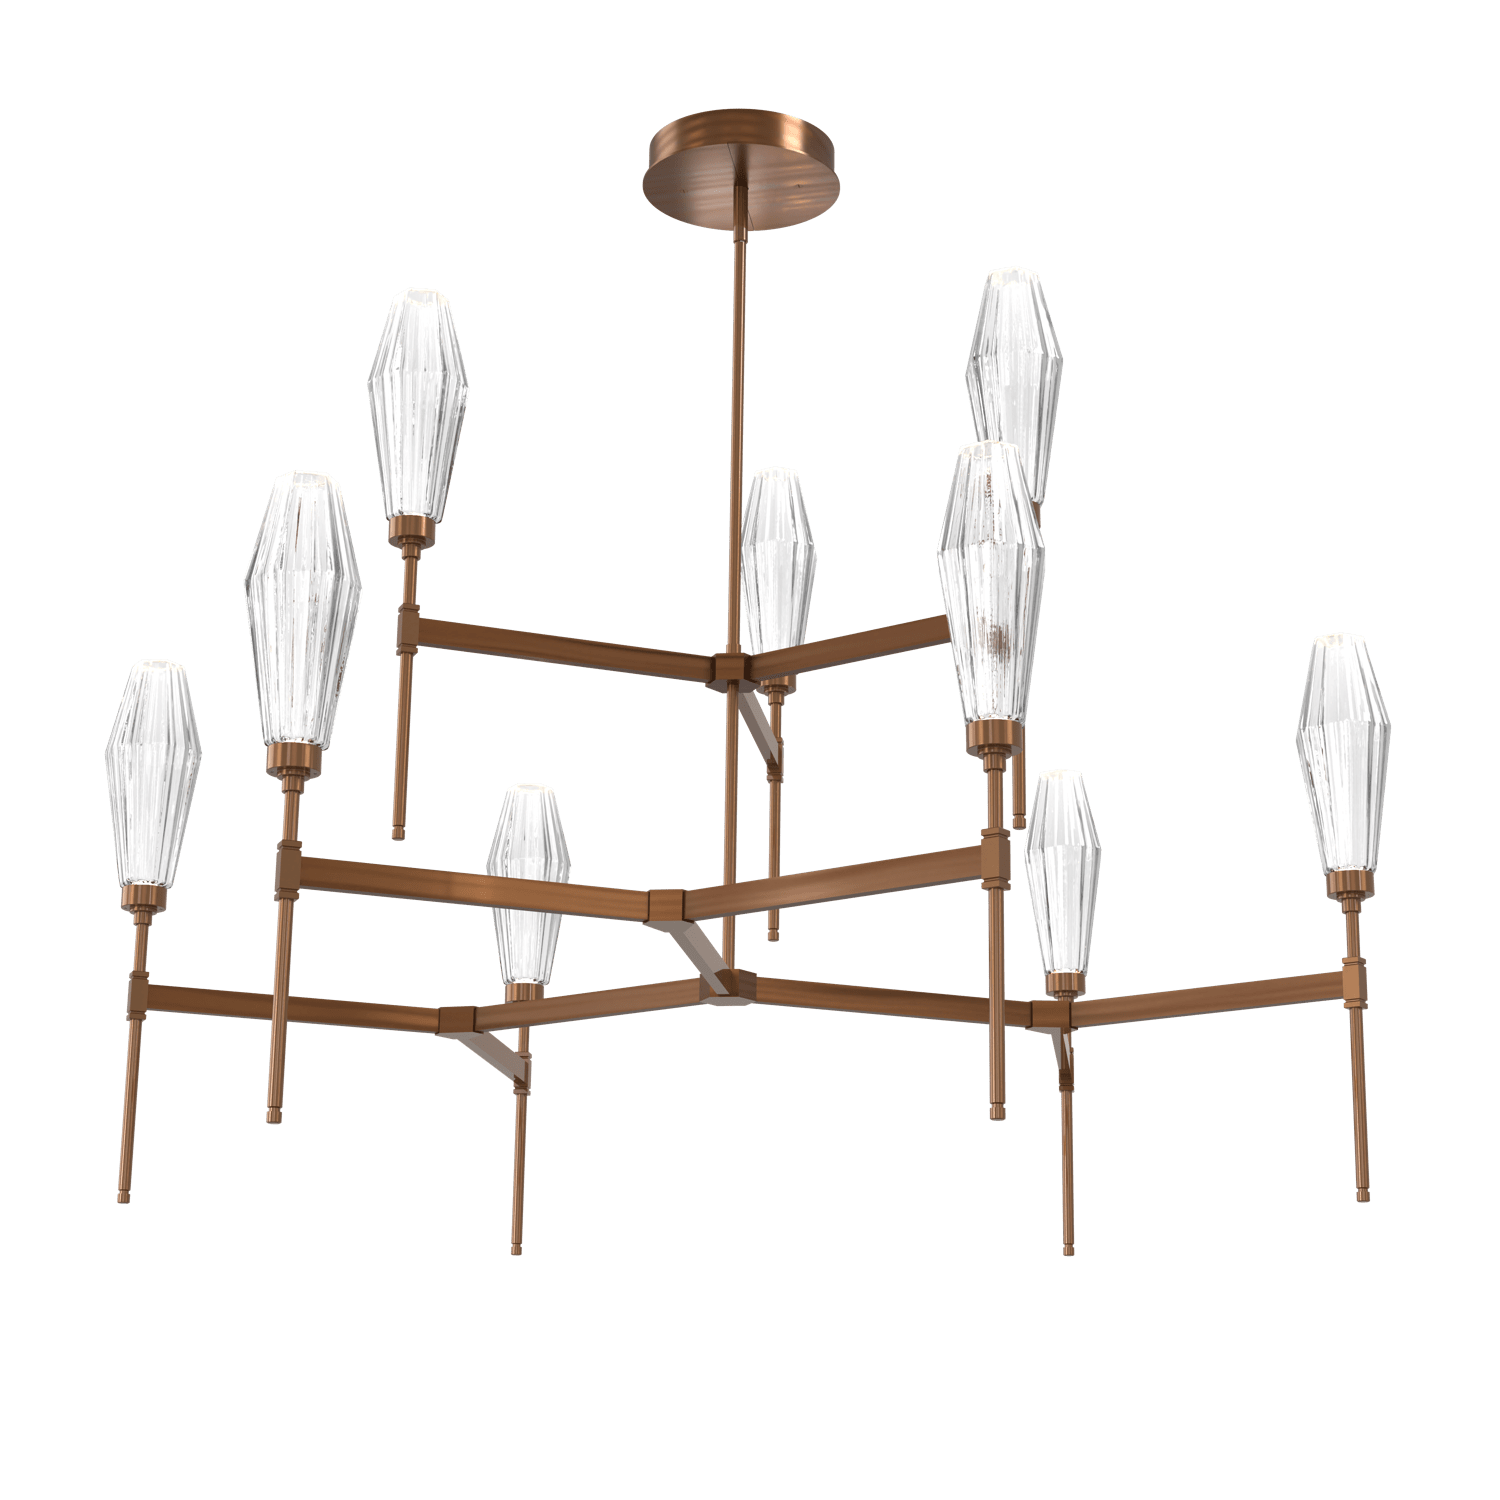 CHB0049-54-RB-RC-Hammerton-Studio-Aalto-54-inch-round-two-tier-belvedere-chandelier-with-oil-rubbed-bronze-finish-and-optic-ribbed-clear-glass-shades-and-LED-lamping